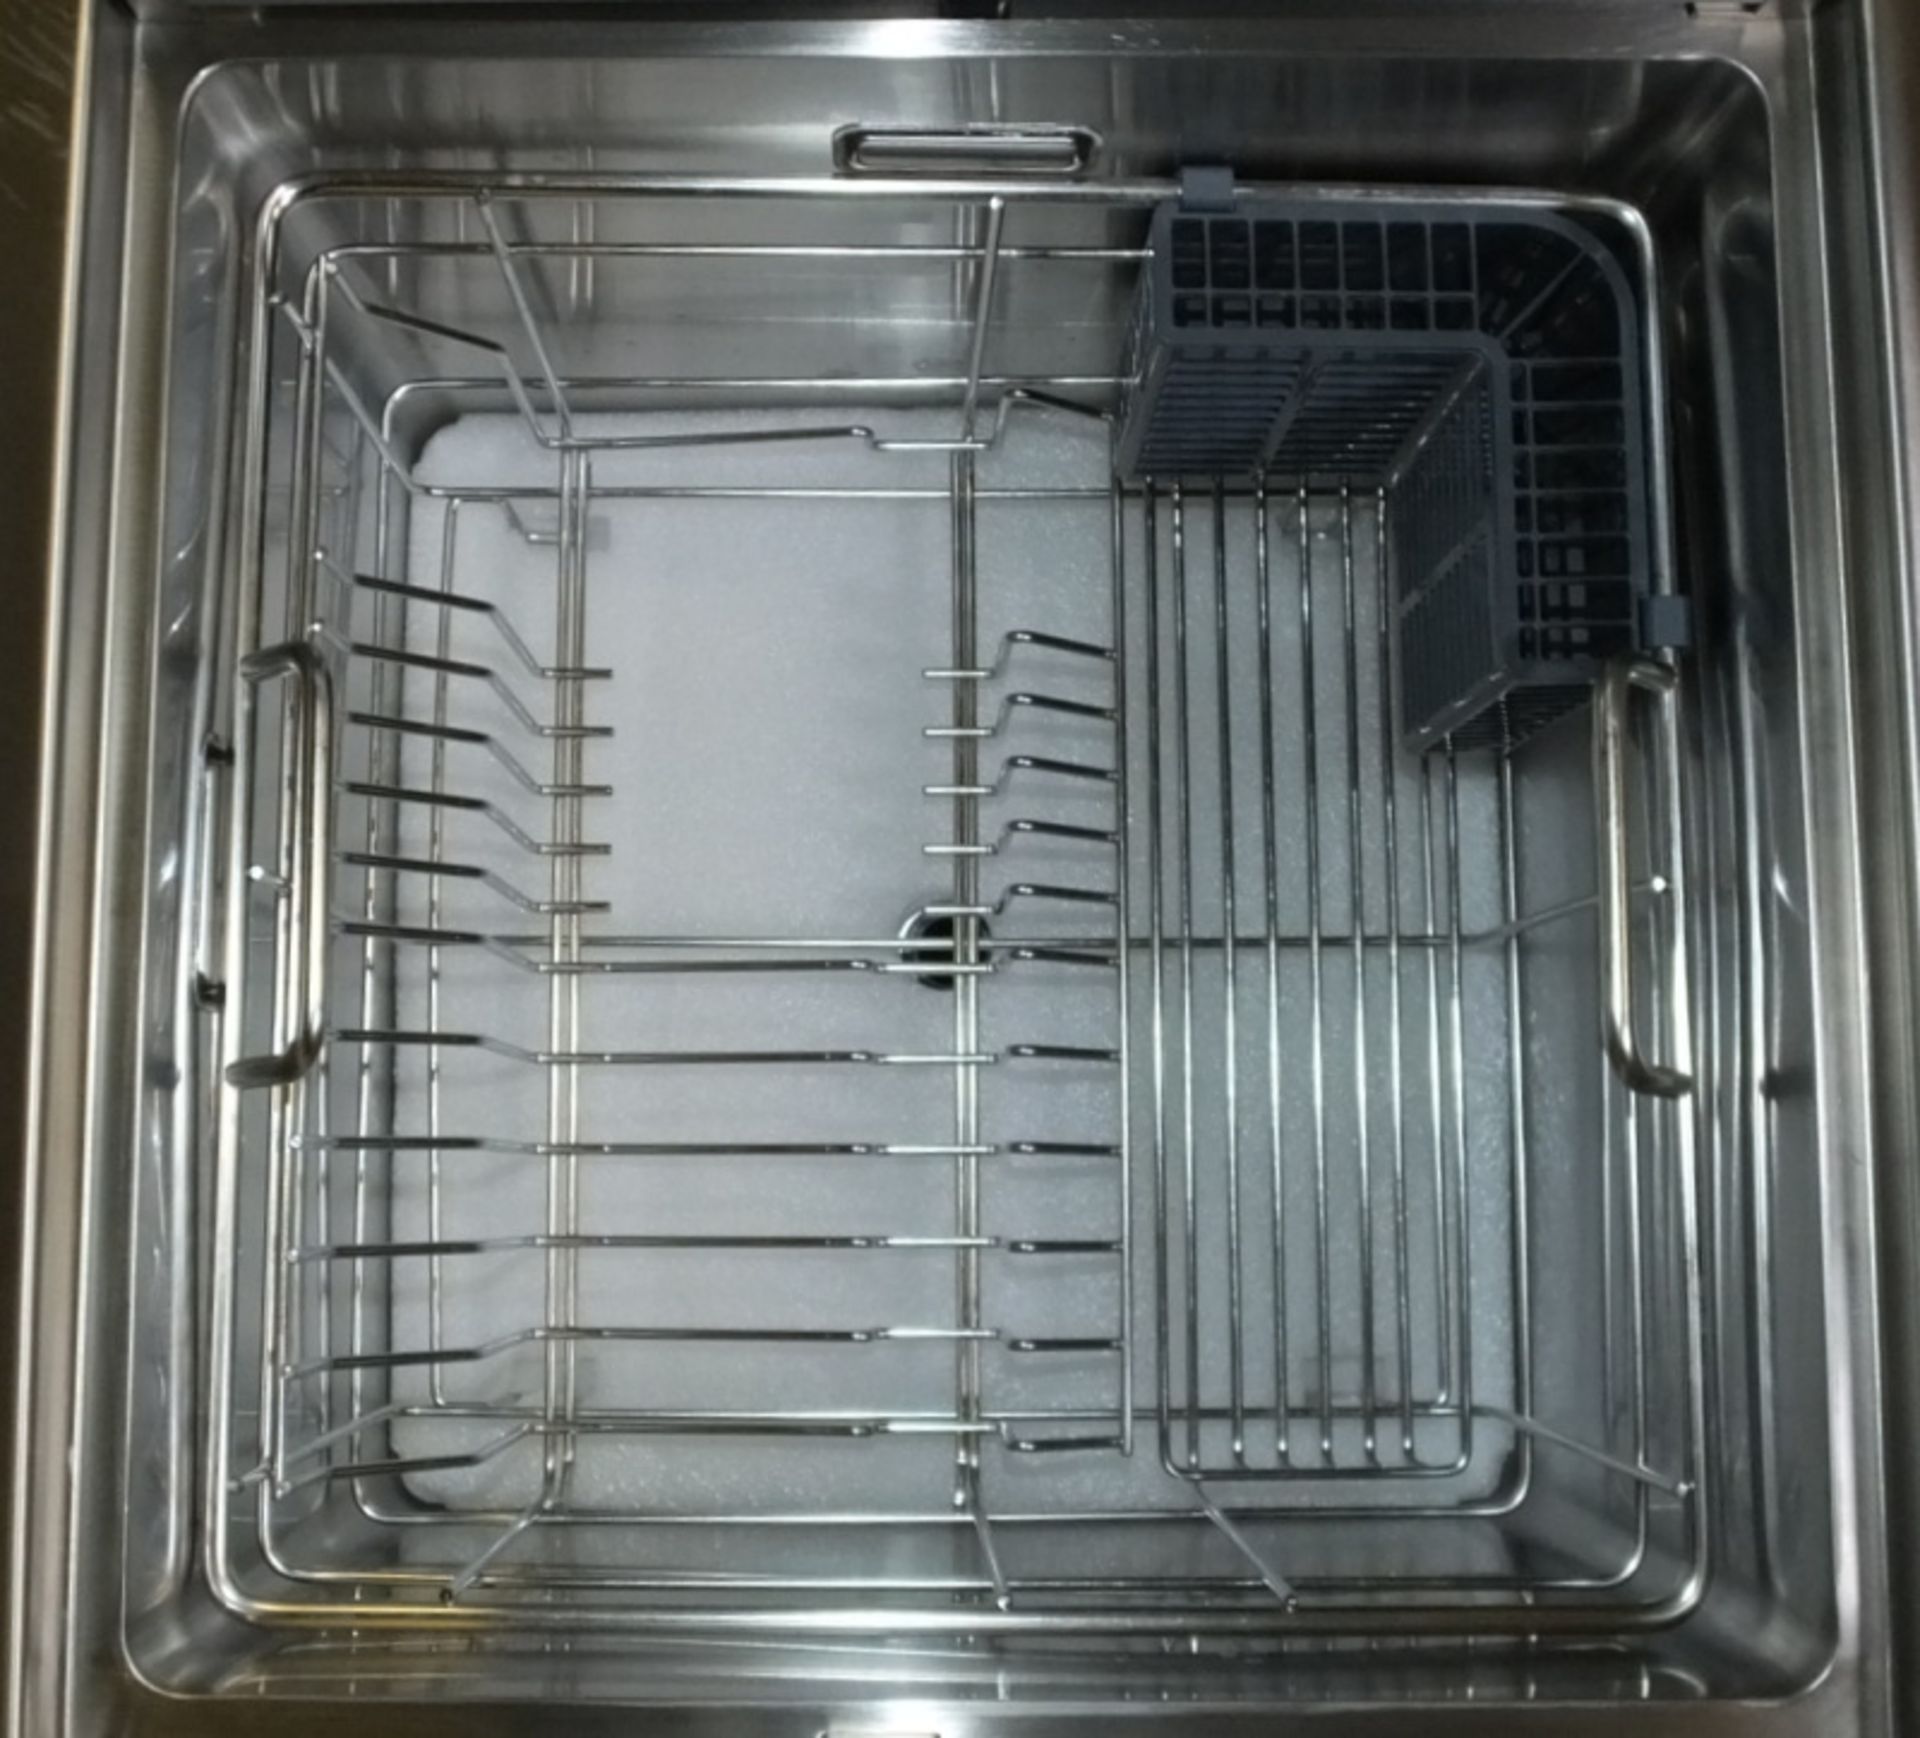 Dishwasher sink unit with tap - Image 6 of 11